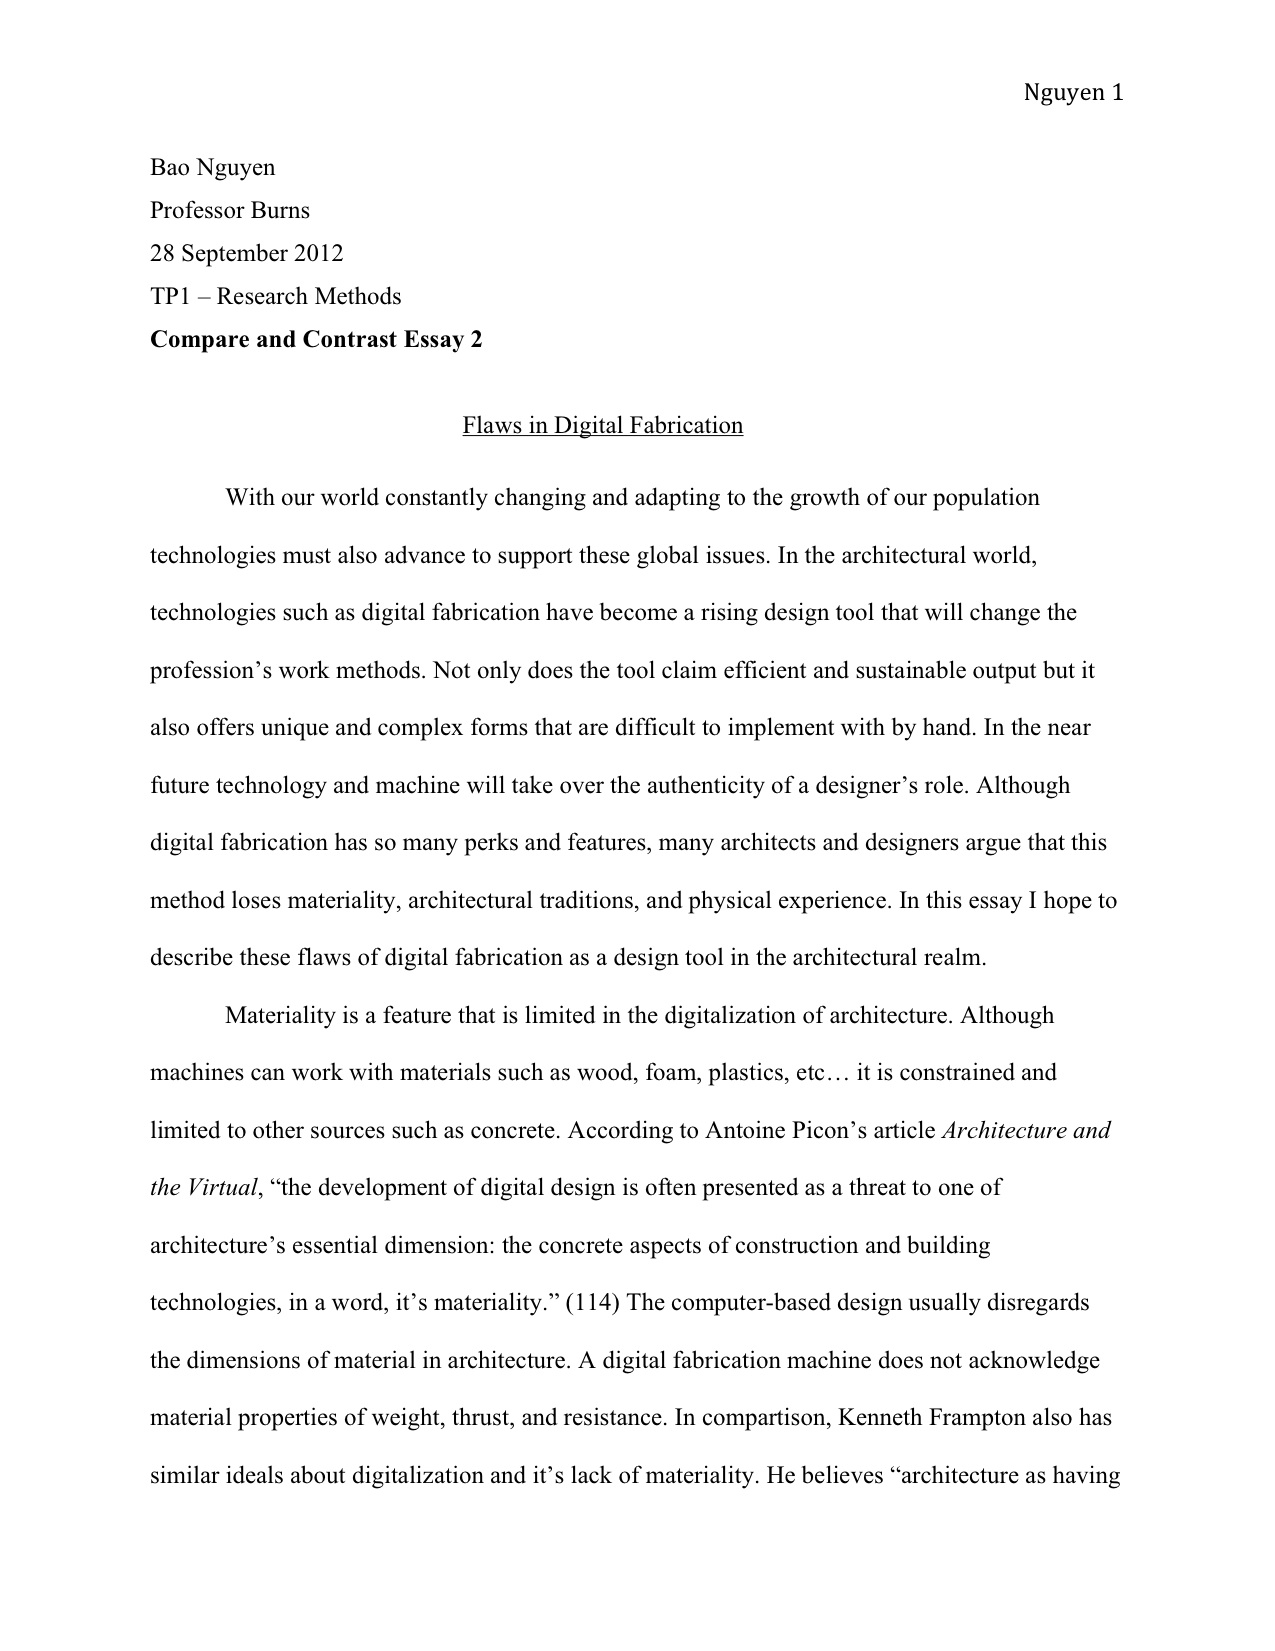 How to write a thesis paragraph for an essay